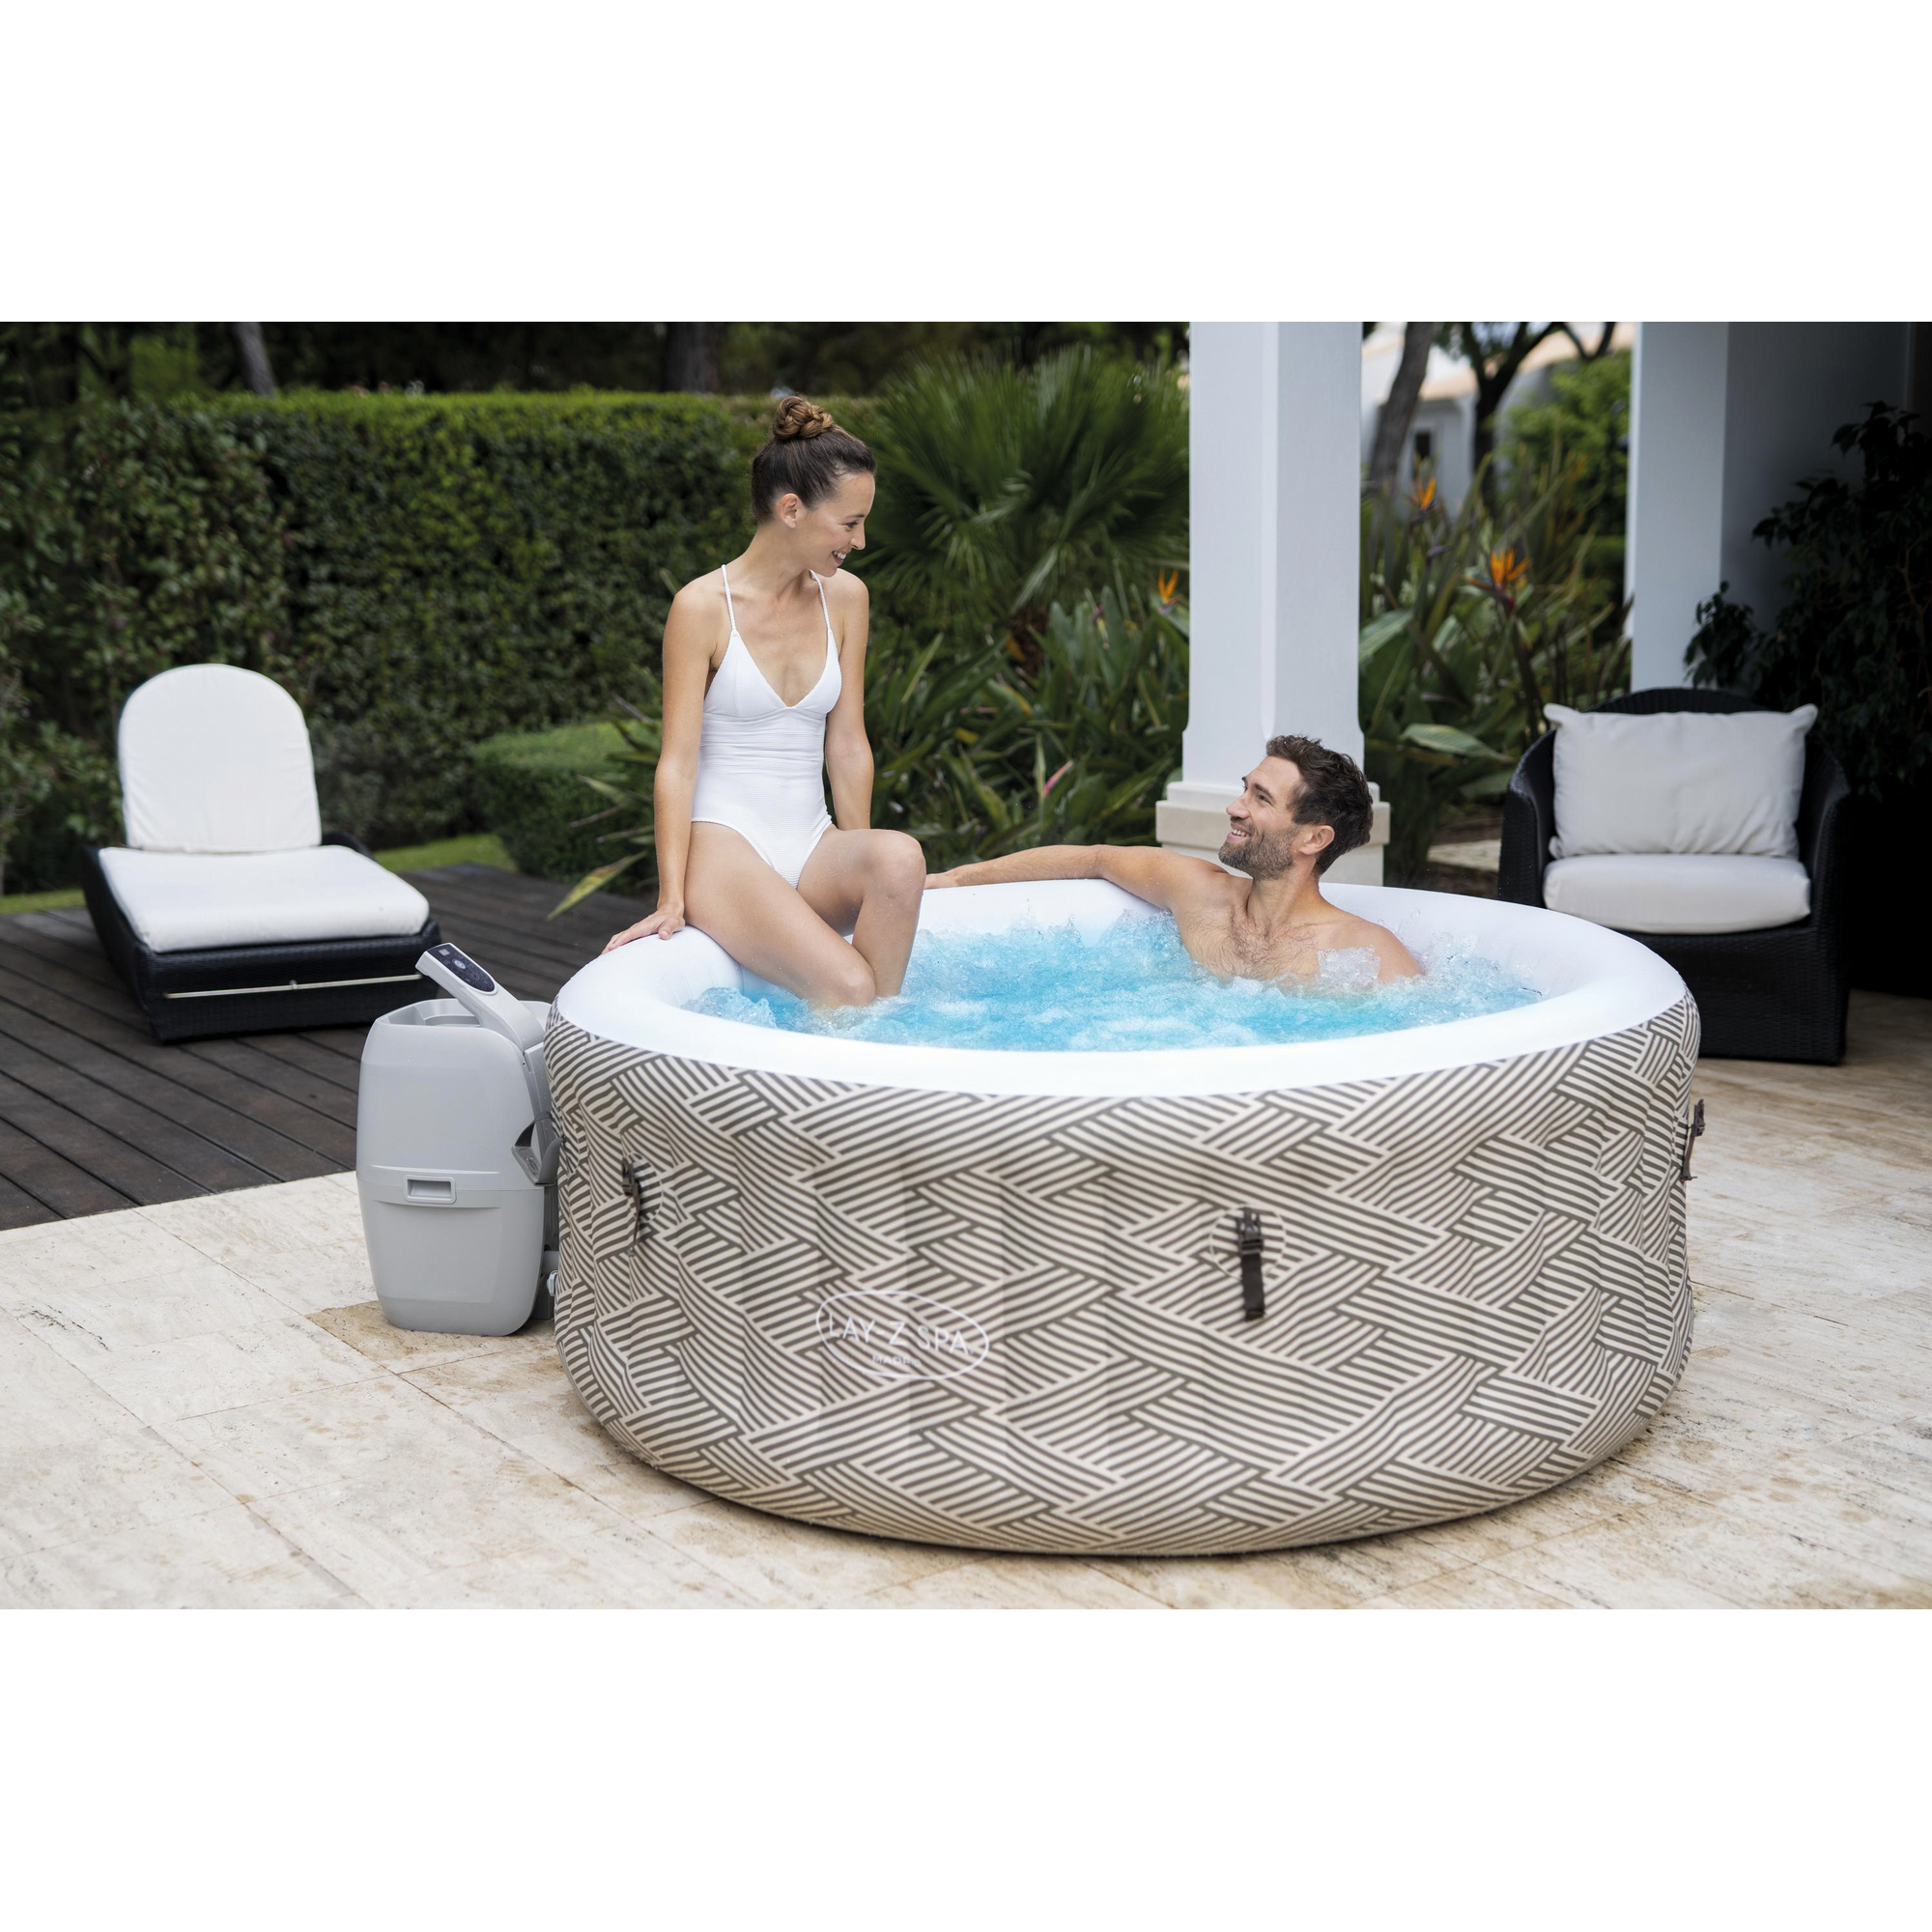 WLAN-Whirlpool 'LAY-Z-SPA Madrid AirJet' Ø 180 x 66 cm beige + product picture